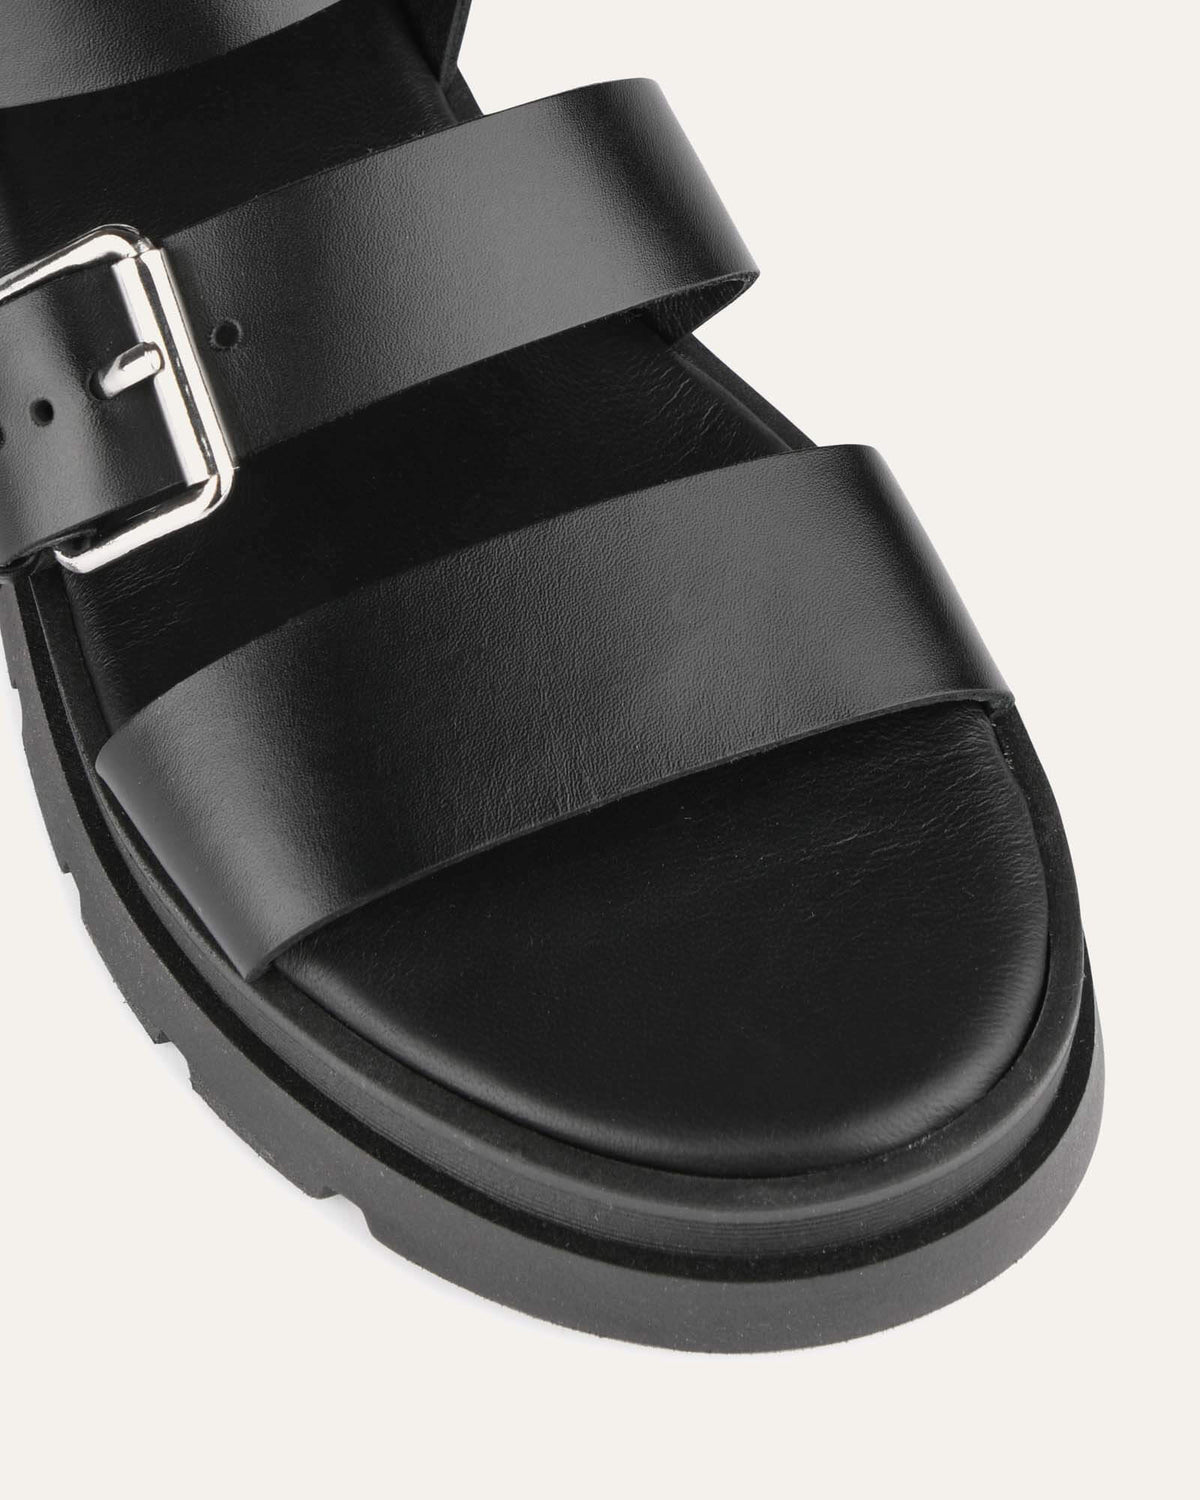 GIA FLAT SANDALS BLACK LEATHER